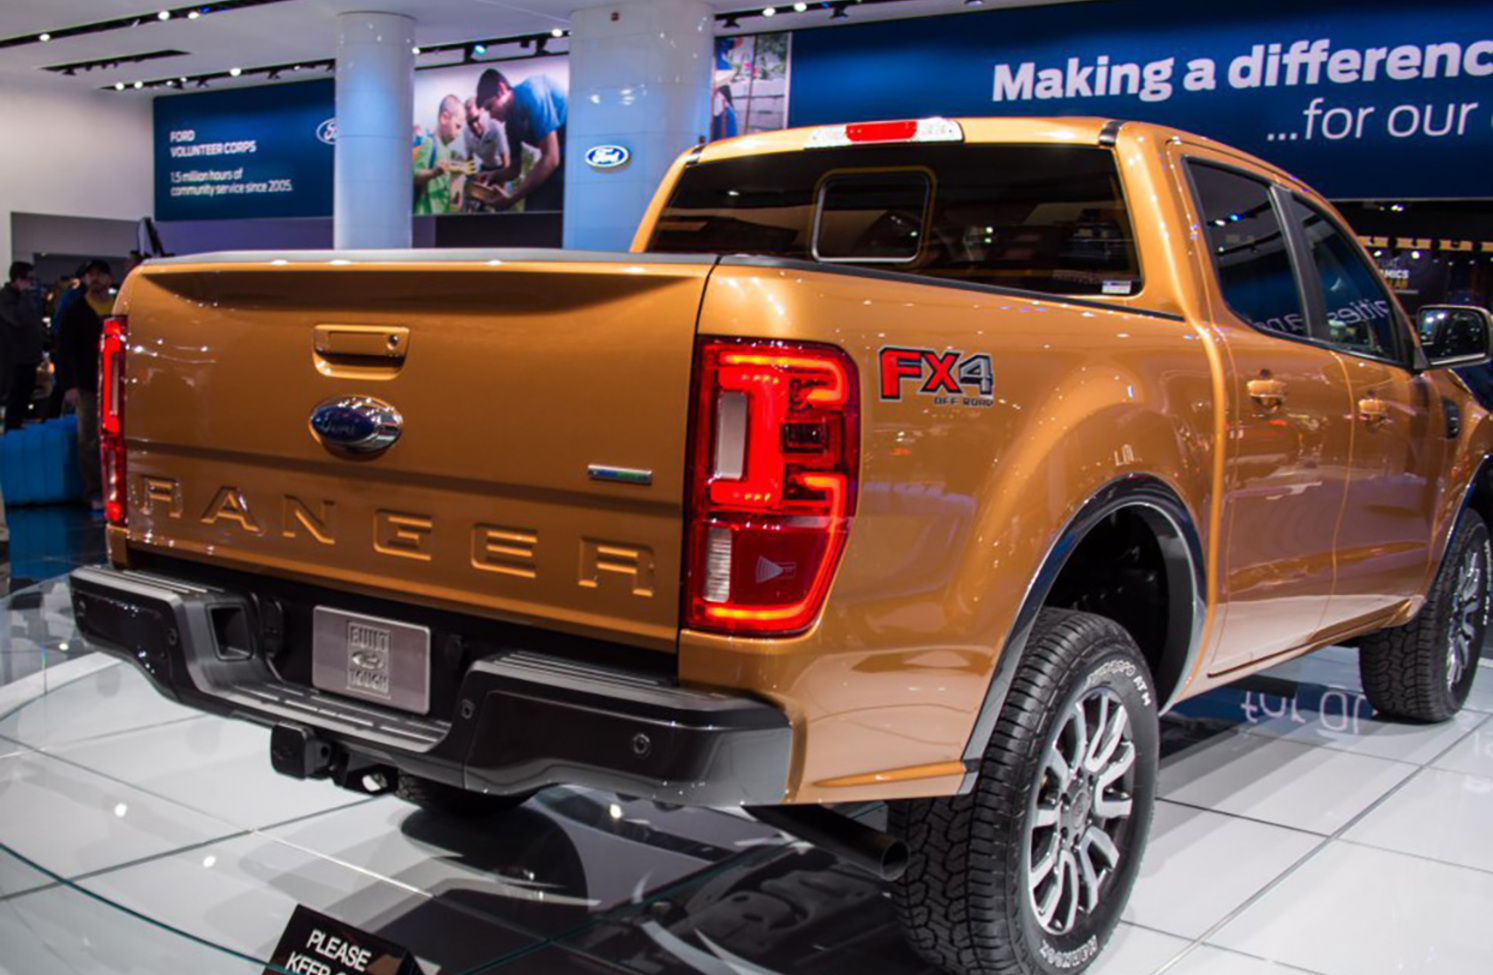 Ford Ranger IV SuperCrew (Americas) 2.3 EcoBoost (270 Hp) 4x4 Automatic 2019, 2020, 2021 